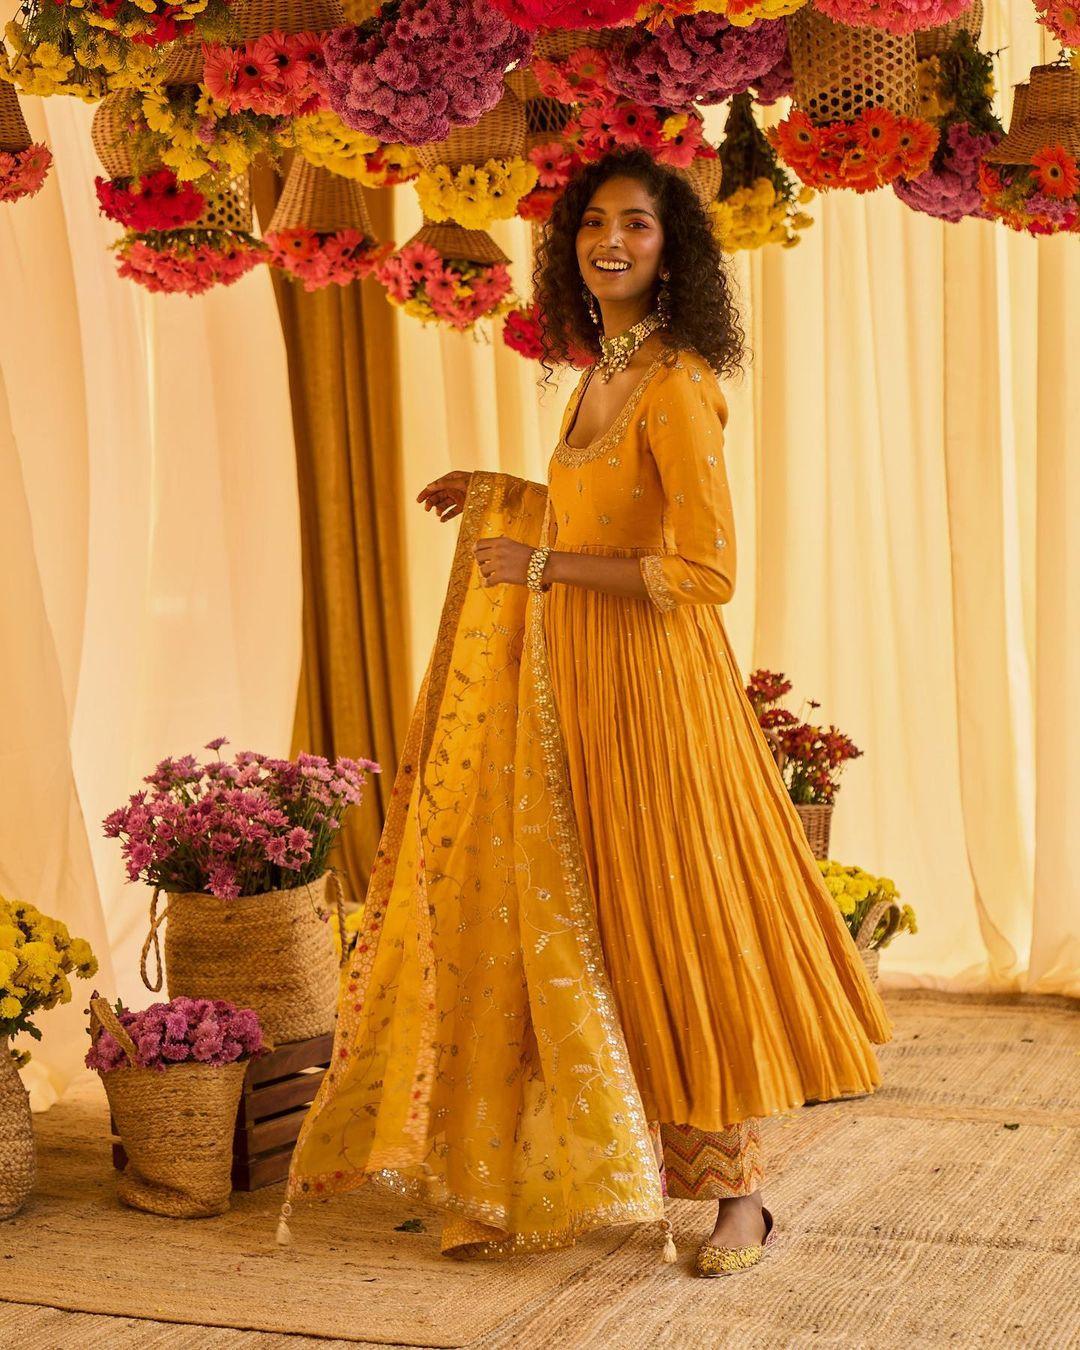 Prettiest Haldi Outfits We Spotted On Our Real Brides! | Haldi ceremony  outfit, Indian wedding photography poses, Bridesmaid photoshoot